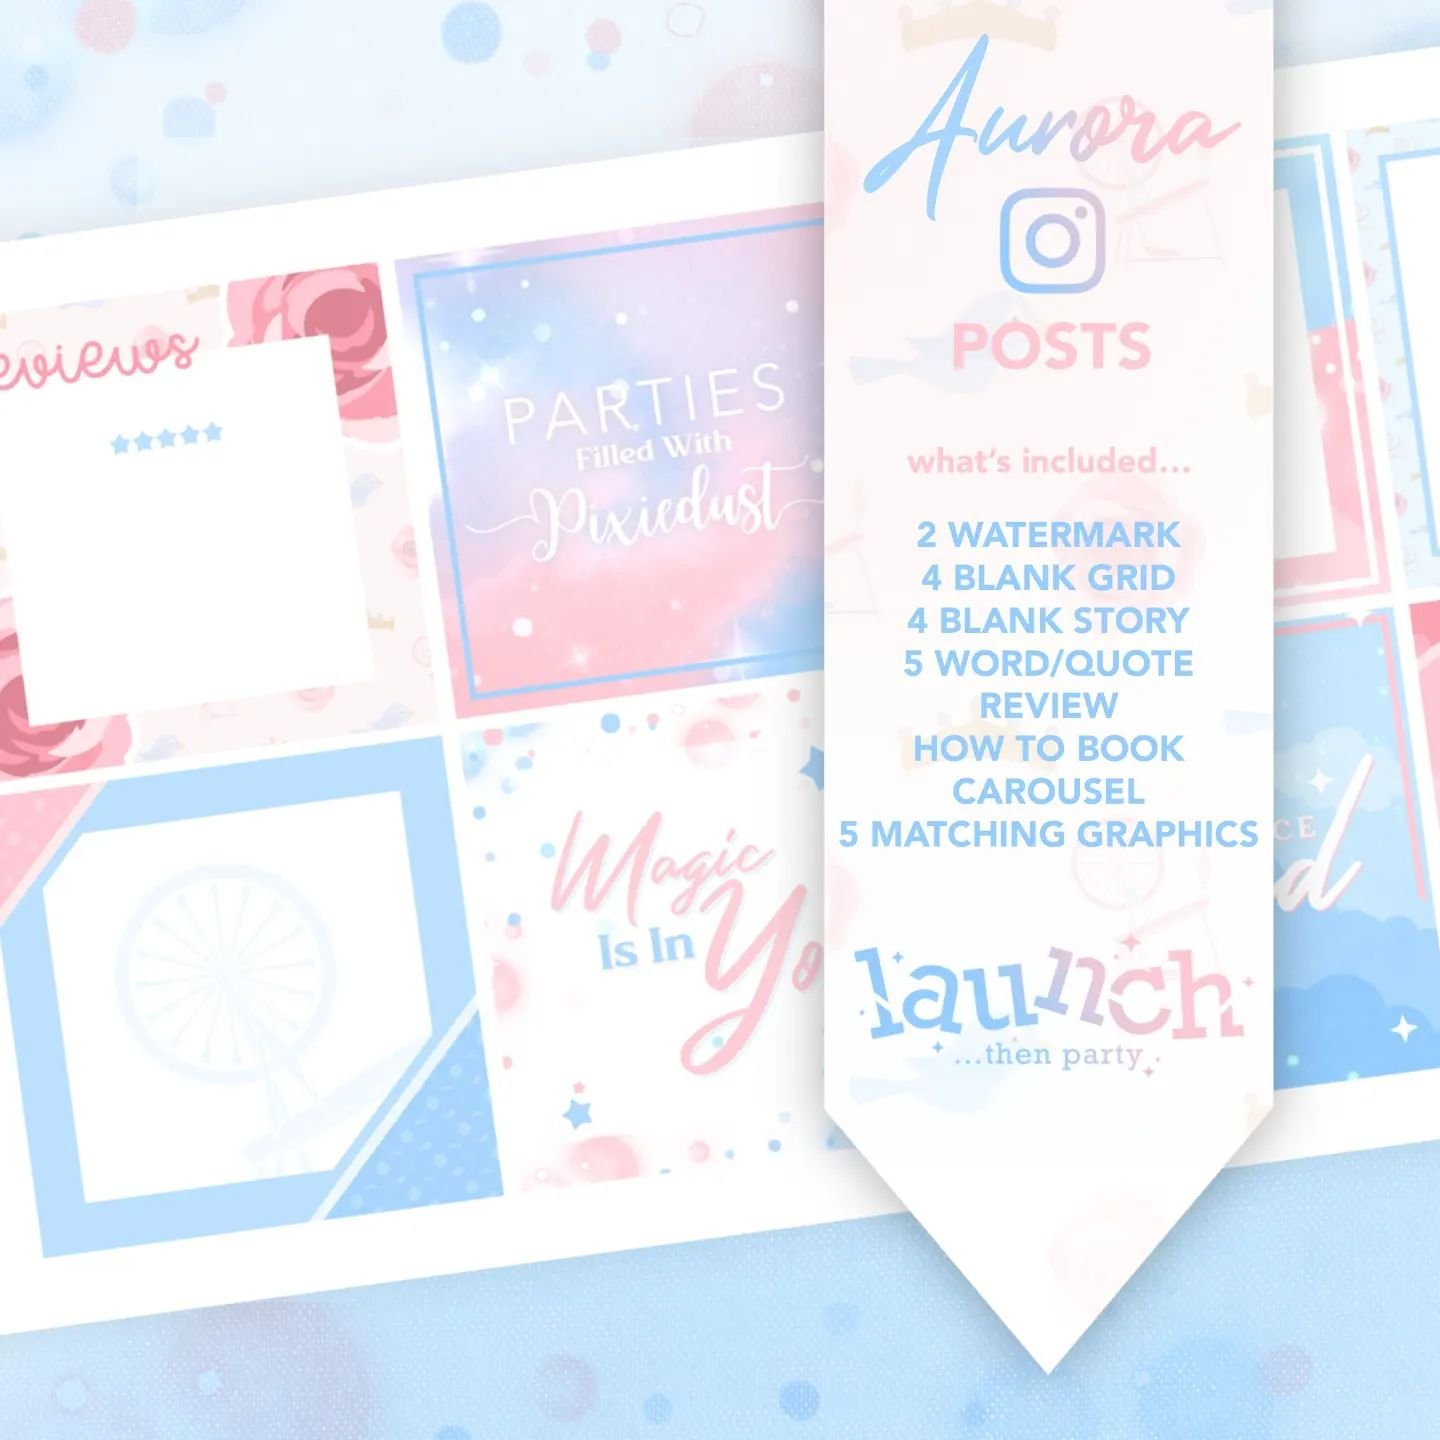 Monday Magic 👇

Introducing our FIRST batch of Social Media templates.

Our Aurora templates match our gorgeous one page website design and are created solely for Princess and Character companies.

We are currently running a 24-hour sale to test our